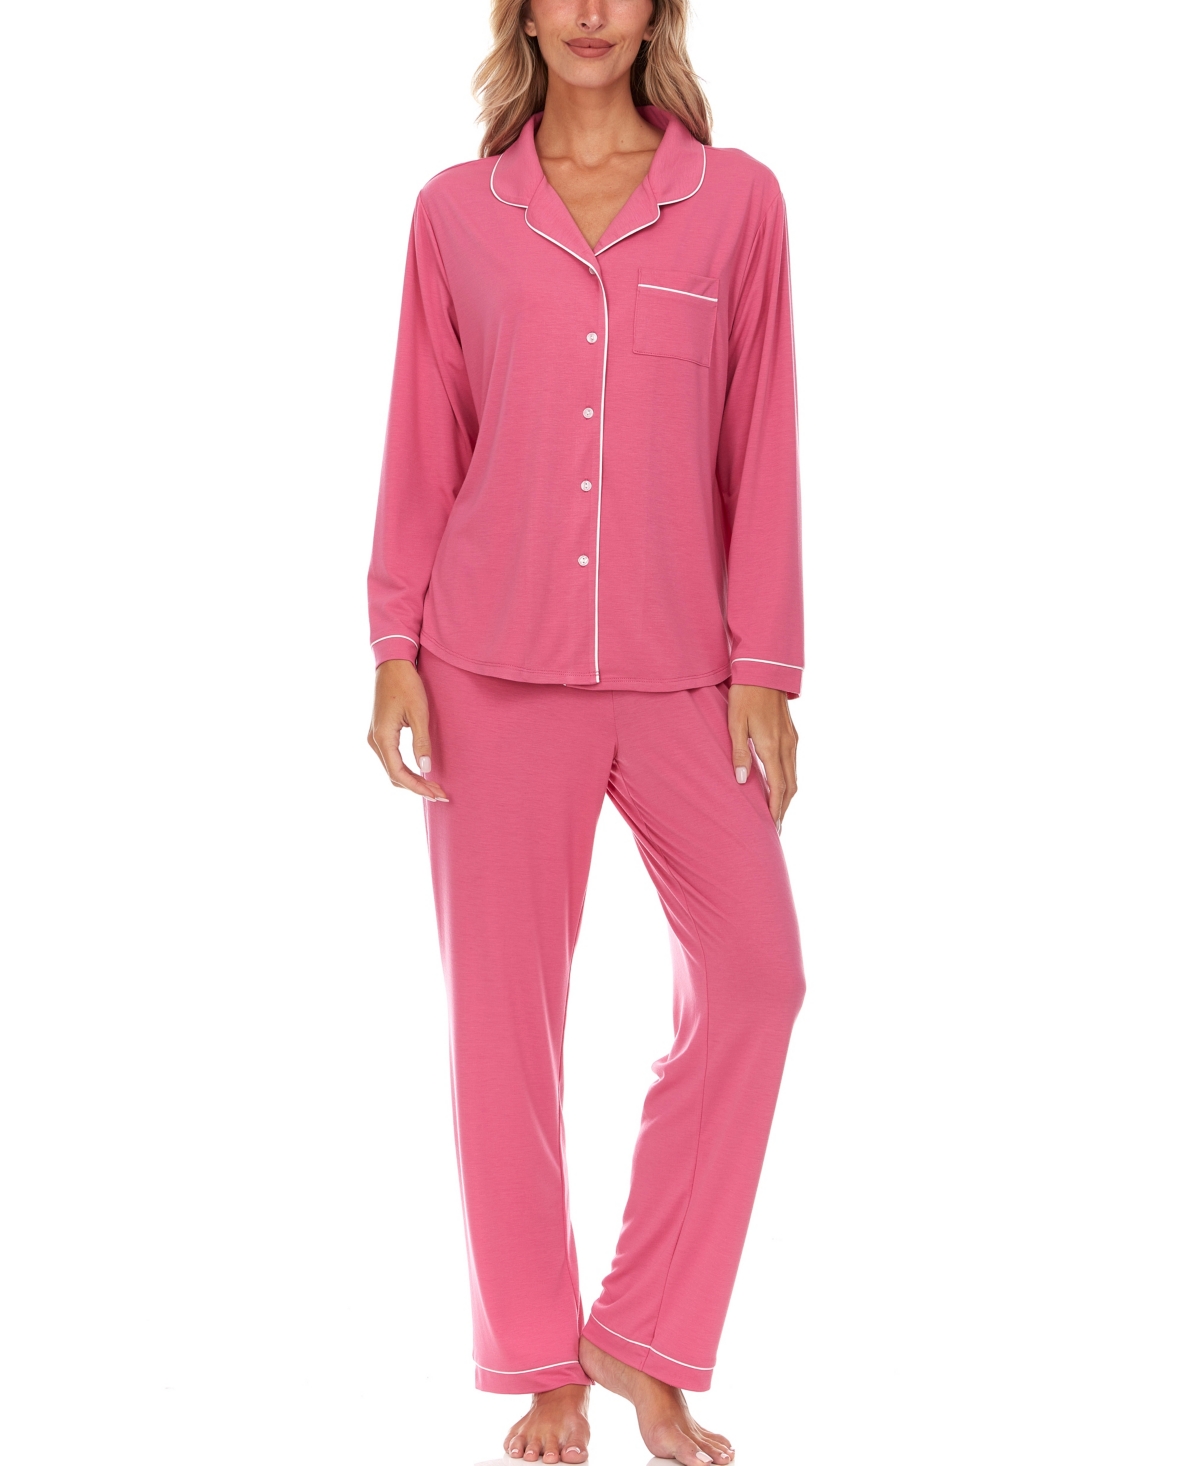 FLORA BY FLORA NIKROOZ WOMEN'S ANNIE 2 PIECE NOTCH LONG SLEEVE TOP AND KNIT PANTS PAJAMA SET